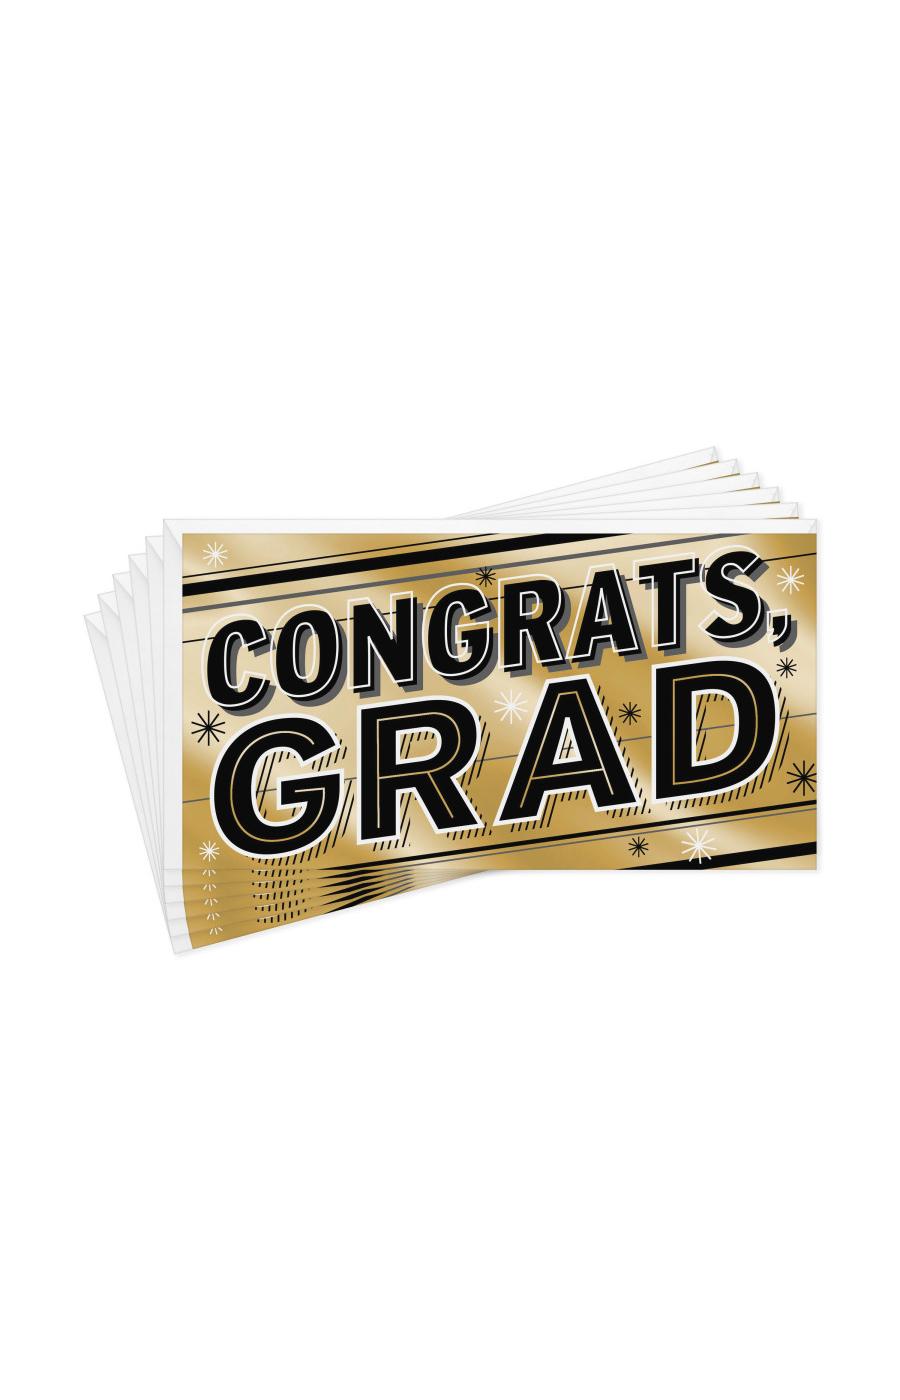 Hallmark Gold Foil Congrats Grad Money Holders or Gift Card Holders with Envelopes - S31, S16; image 1 of 6